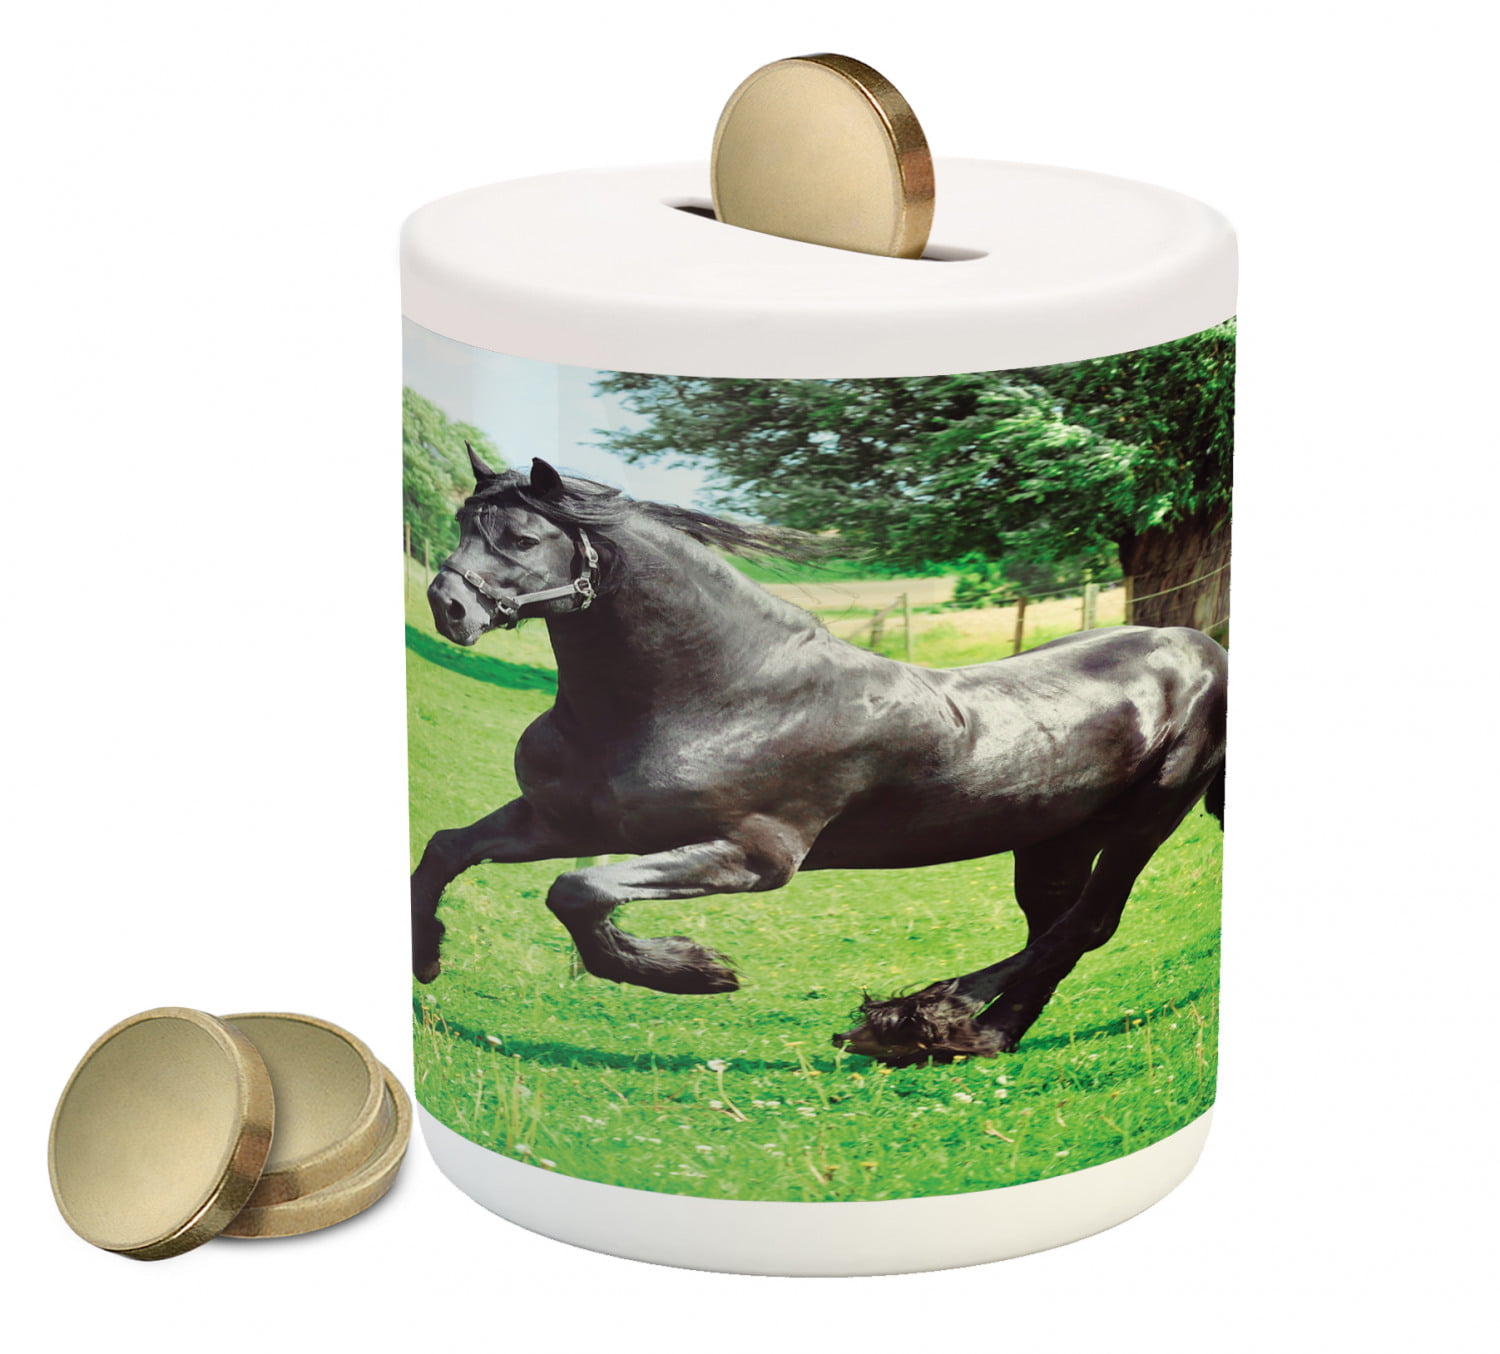 Paint Your Own Ceramic Keepsake The Beloved Horse 